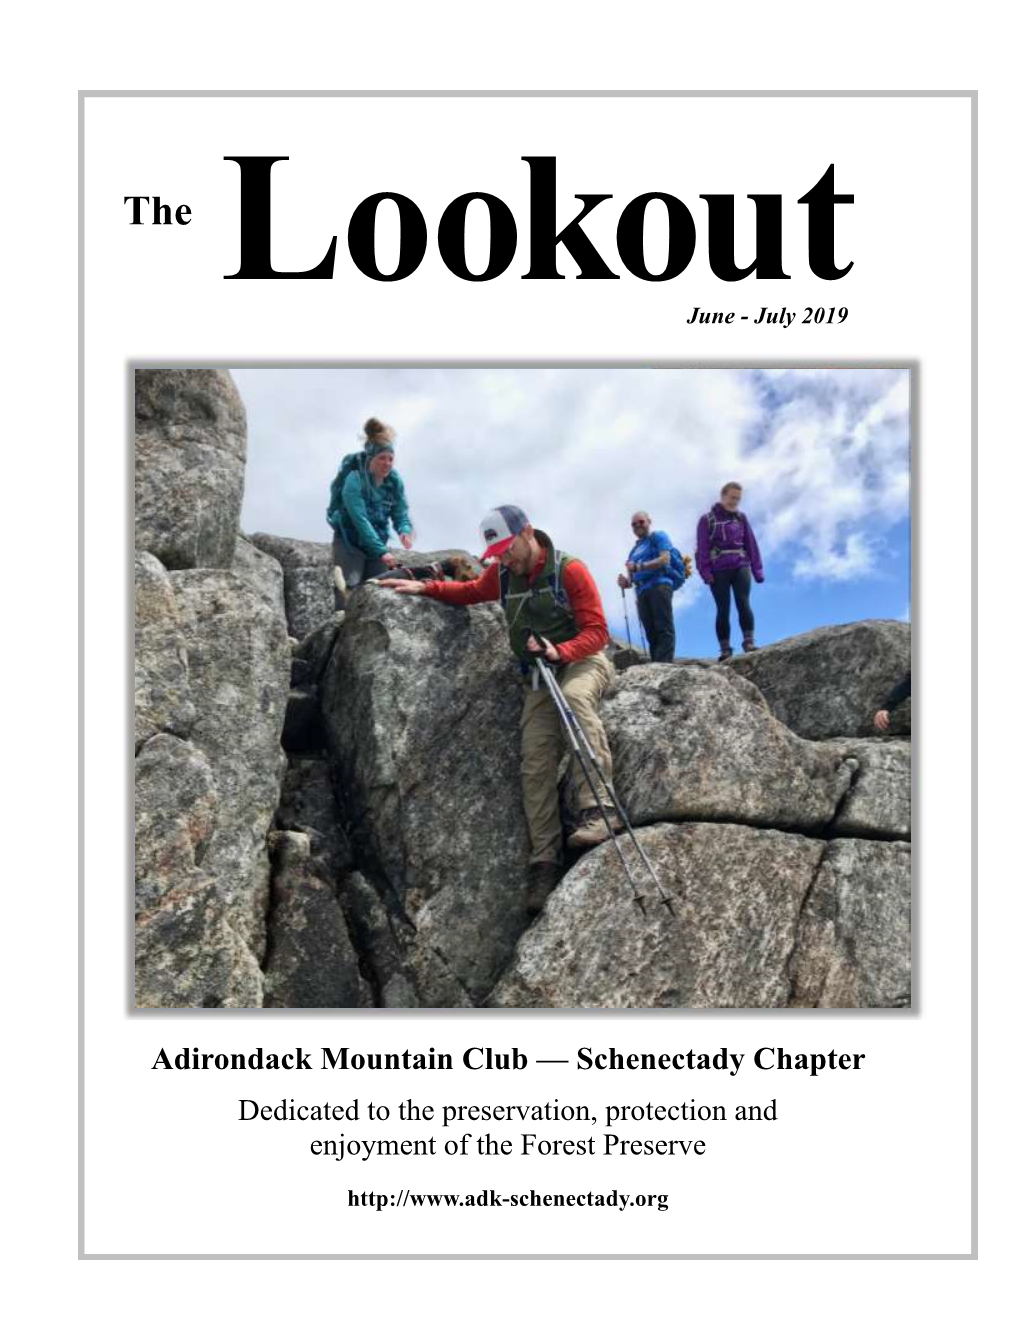 The Lookout June - July 2019